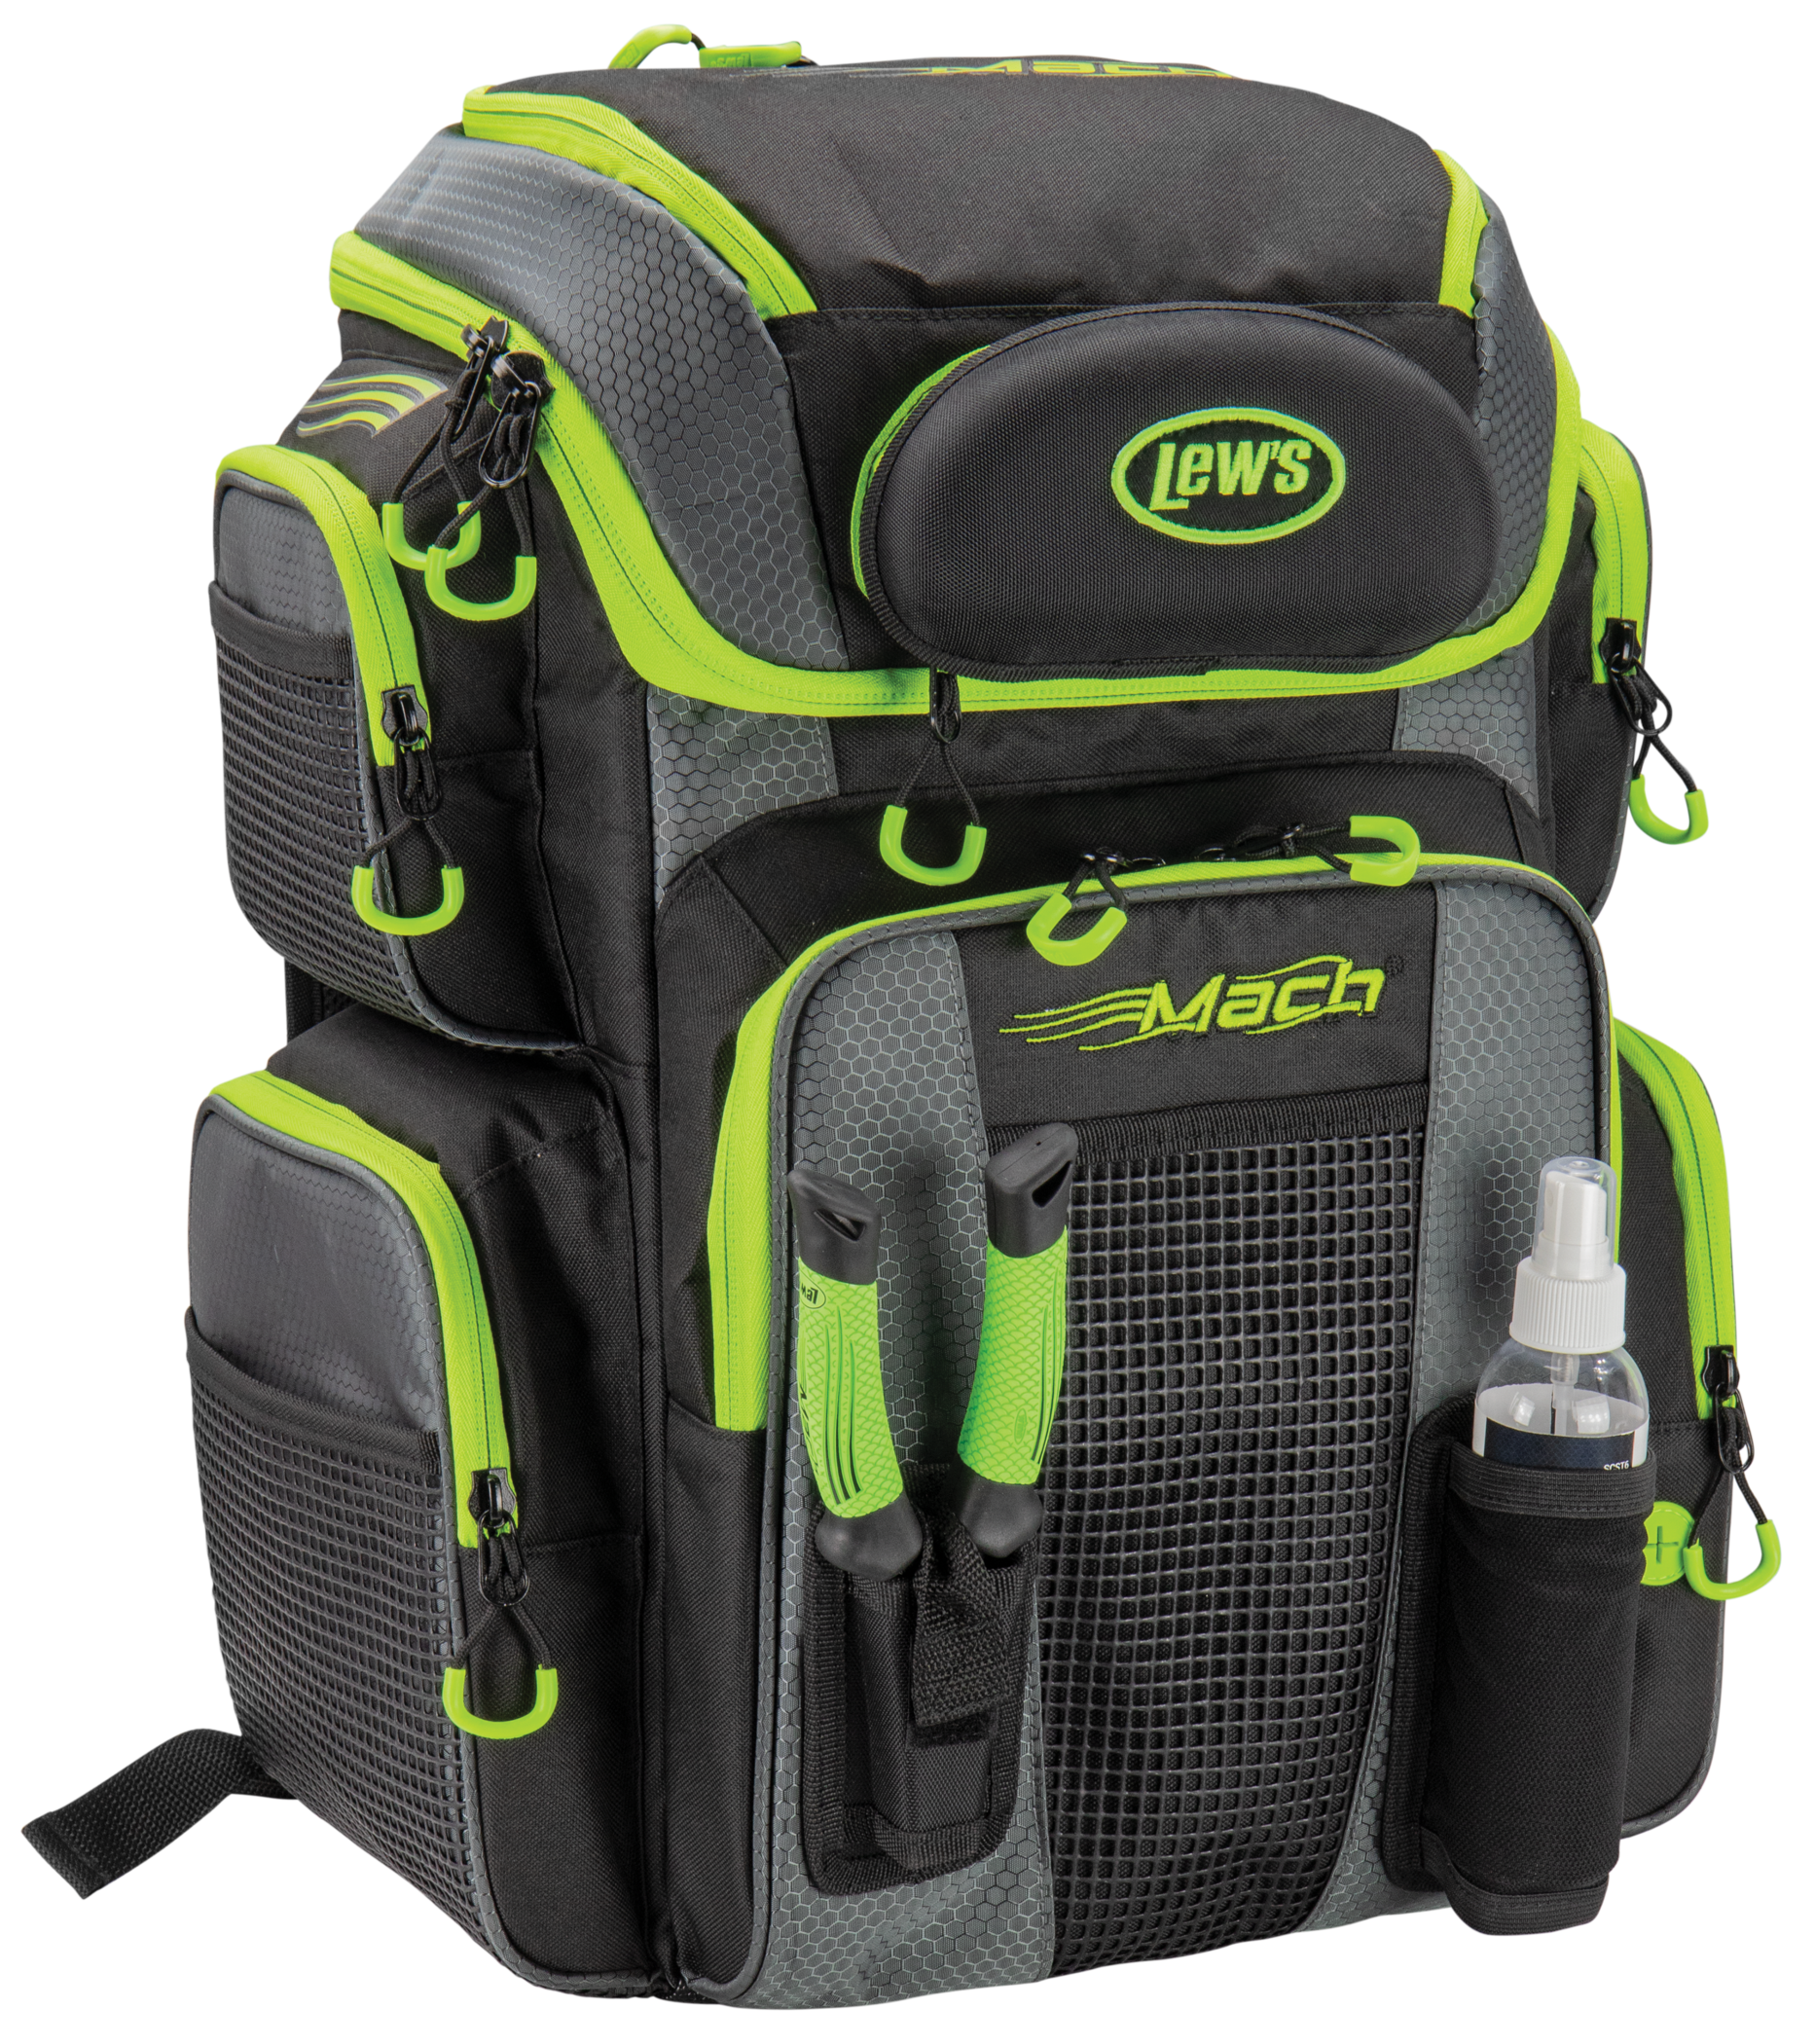 A Tackle Backpack with Lots of Features